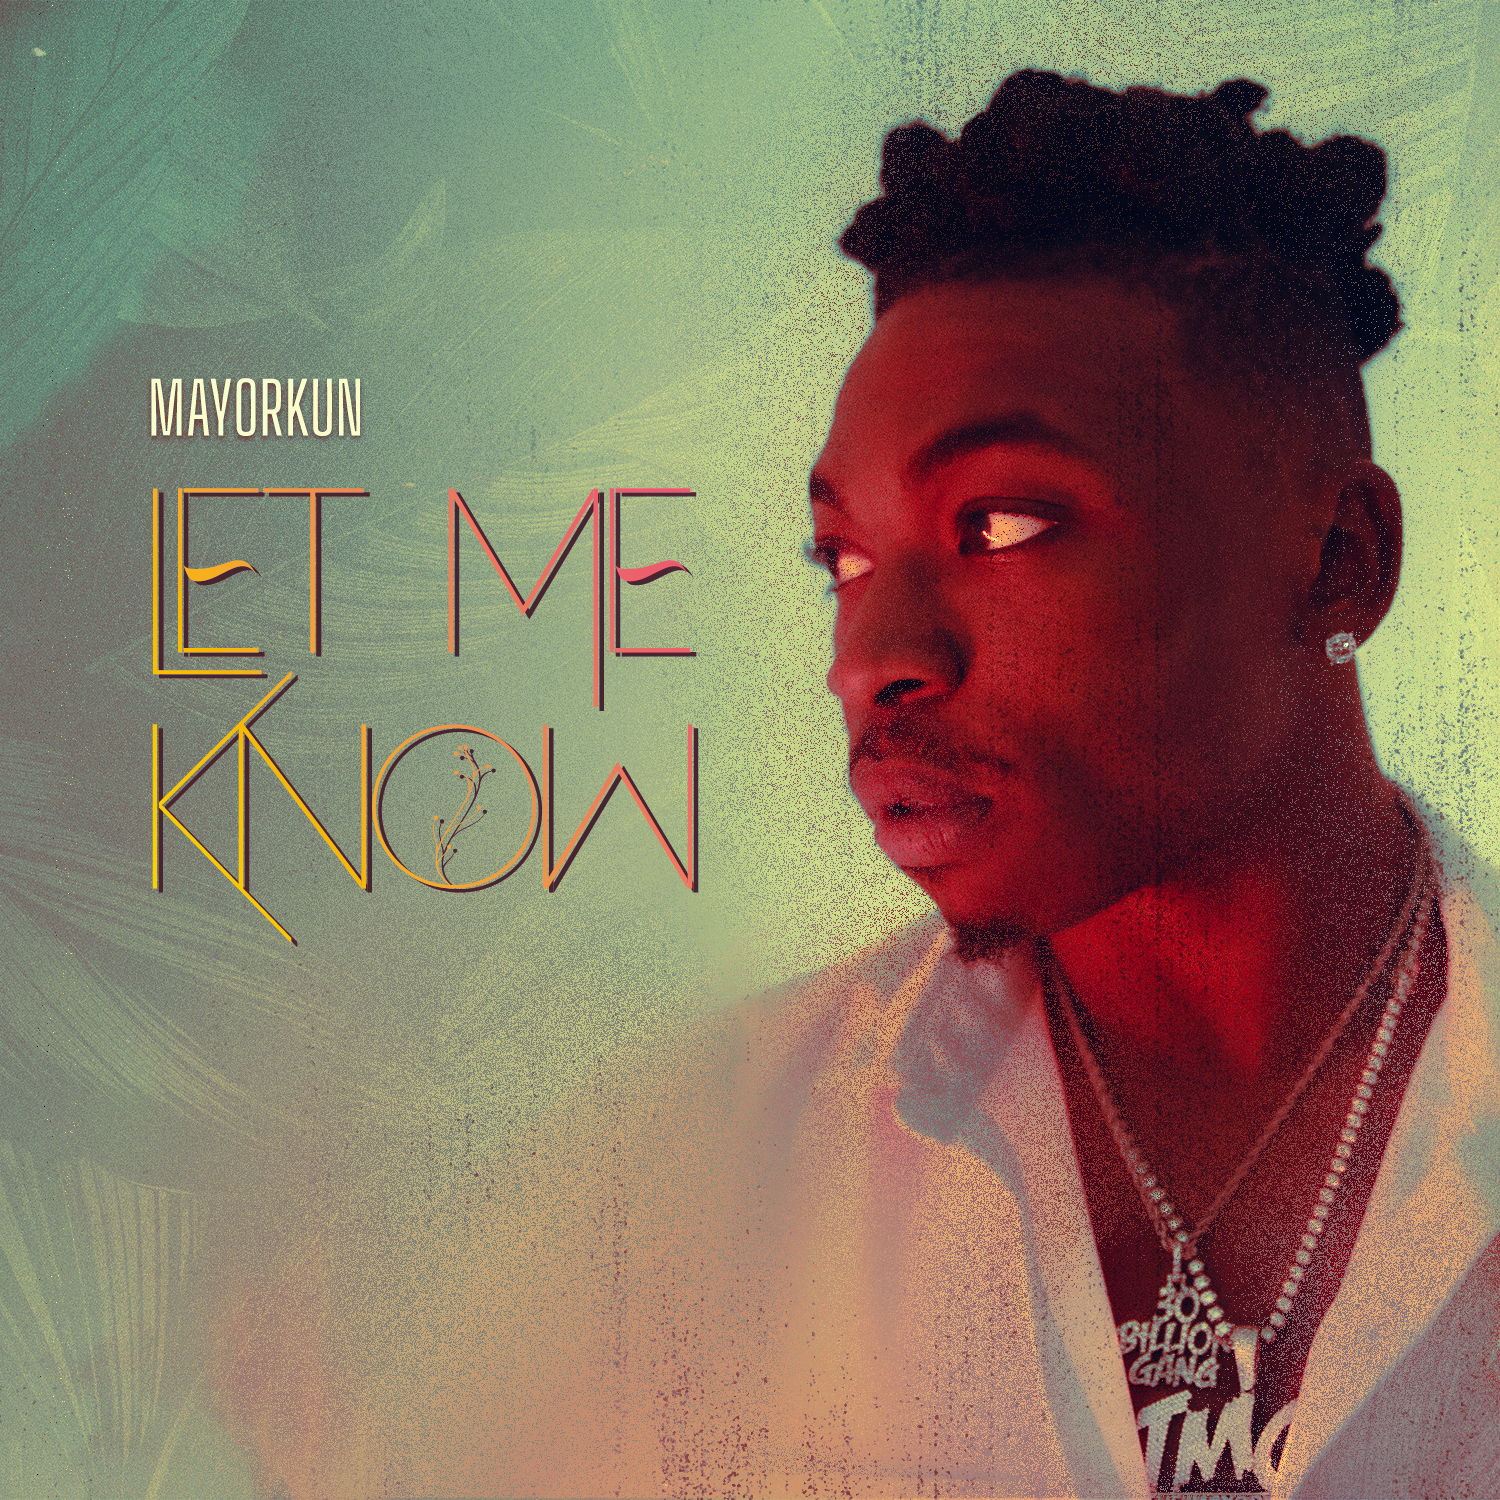 Watch Mayorkun’s Dreamy Visual for New Single “Let Me Know”